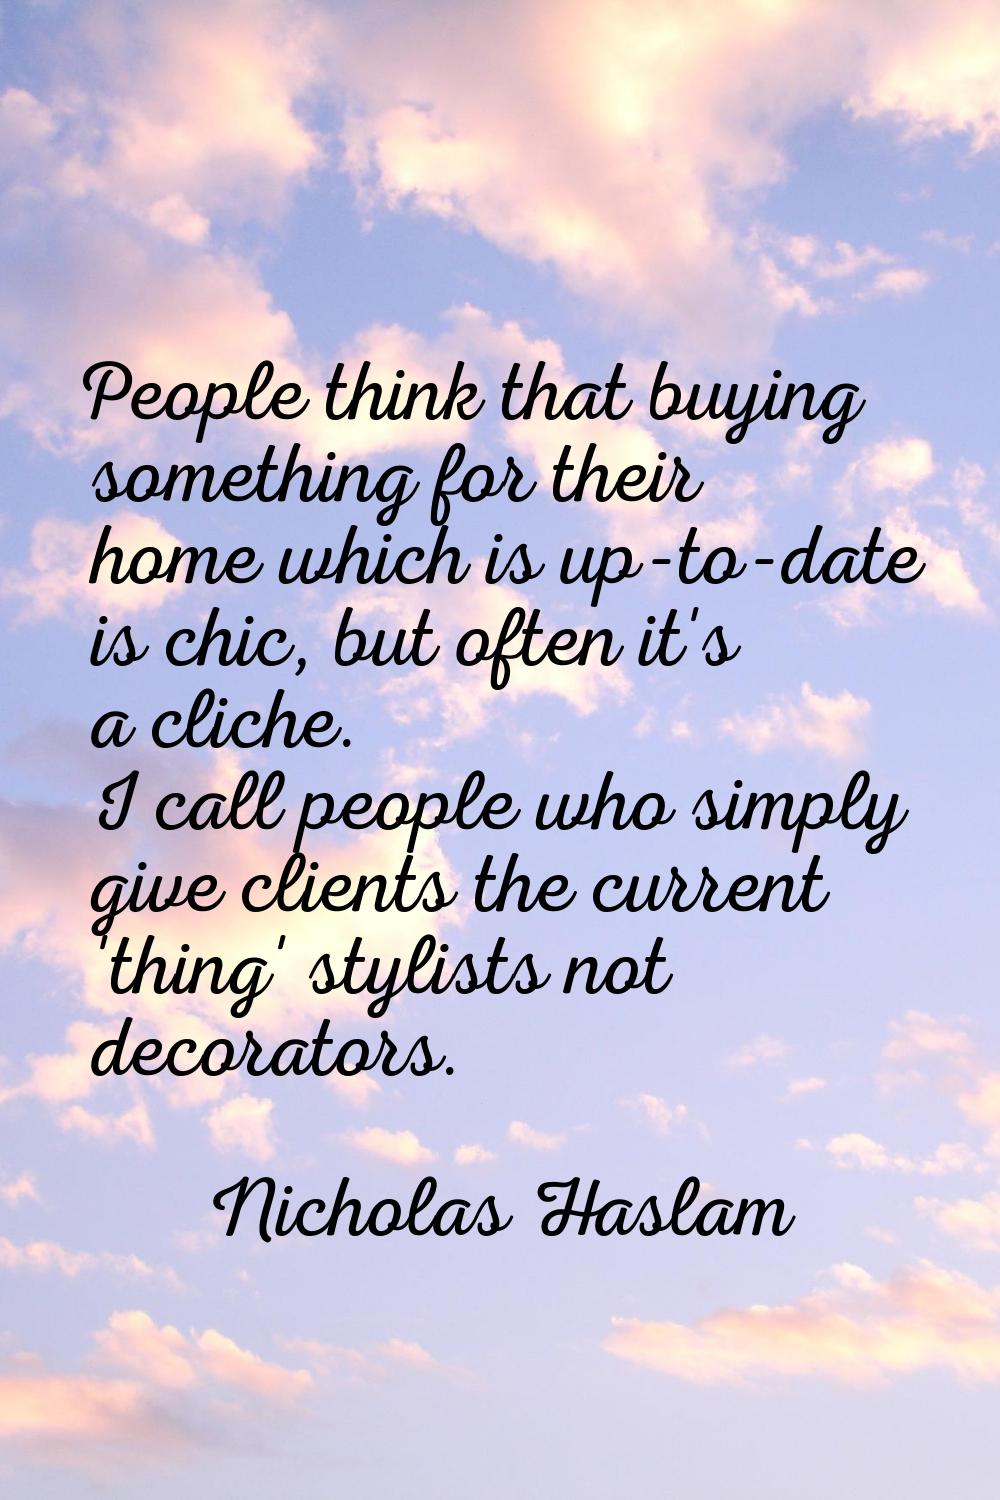 People think that buying something for their home which is up-to-date is chic, but often it's a cli